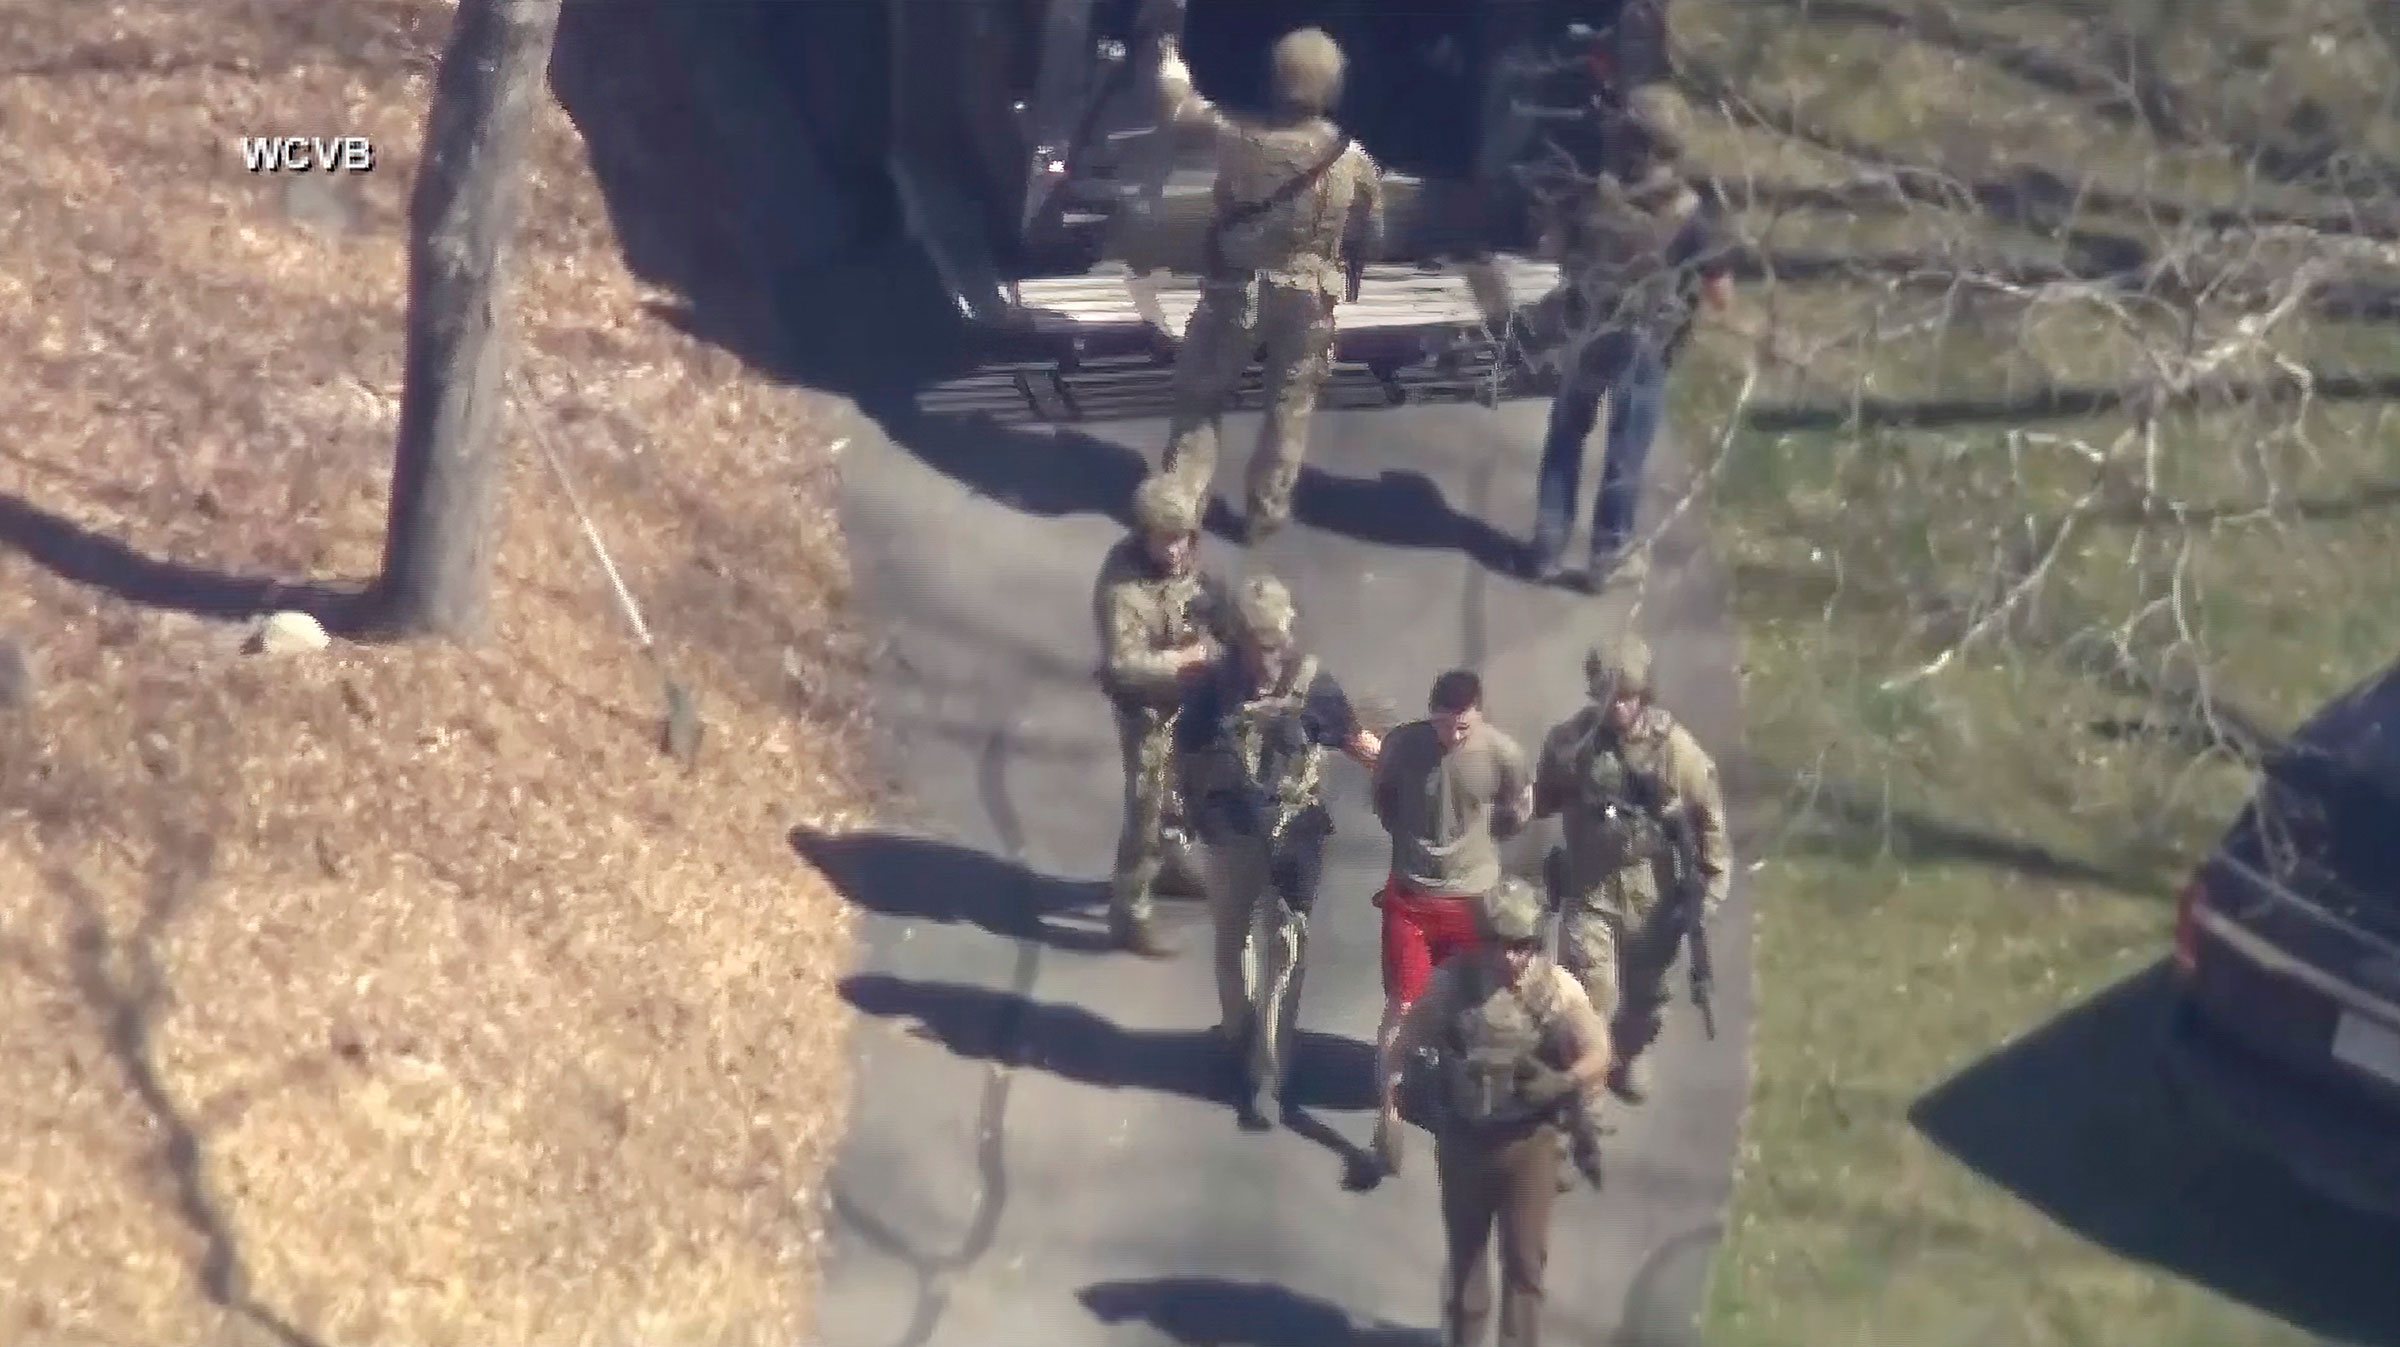 This image made from video provided by WCVB-TV, shows Jack Teixeira, in T-shirt and shorts, being taken into custody by armed tactical agents in Dighton, Mass. on April 13, 2023.